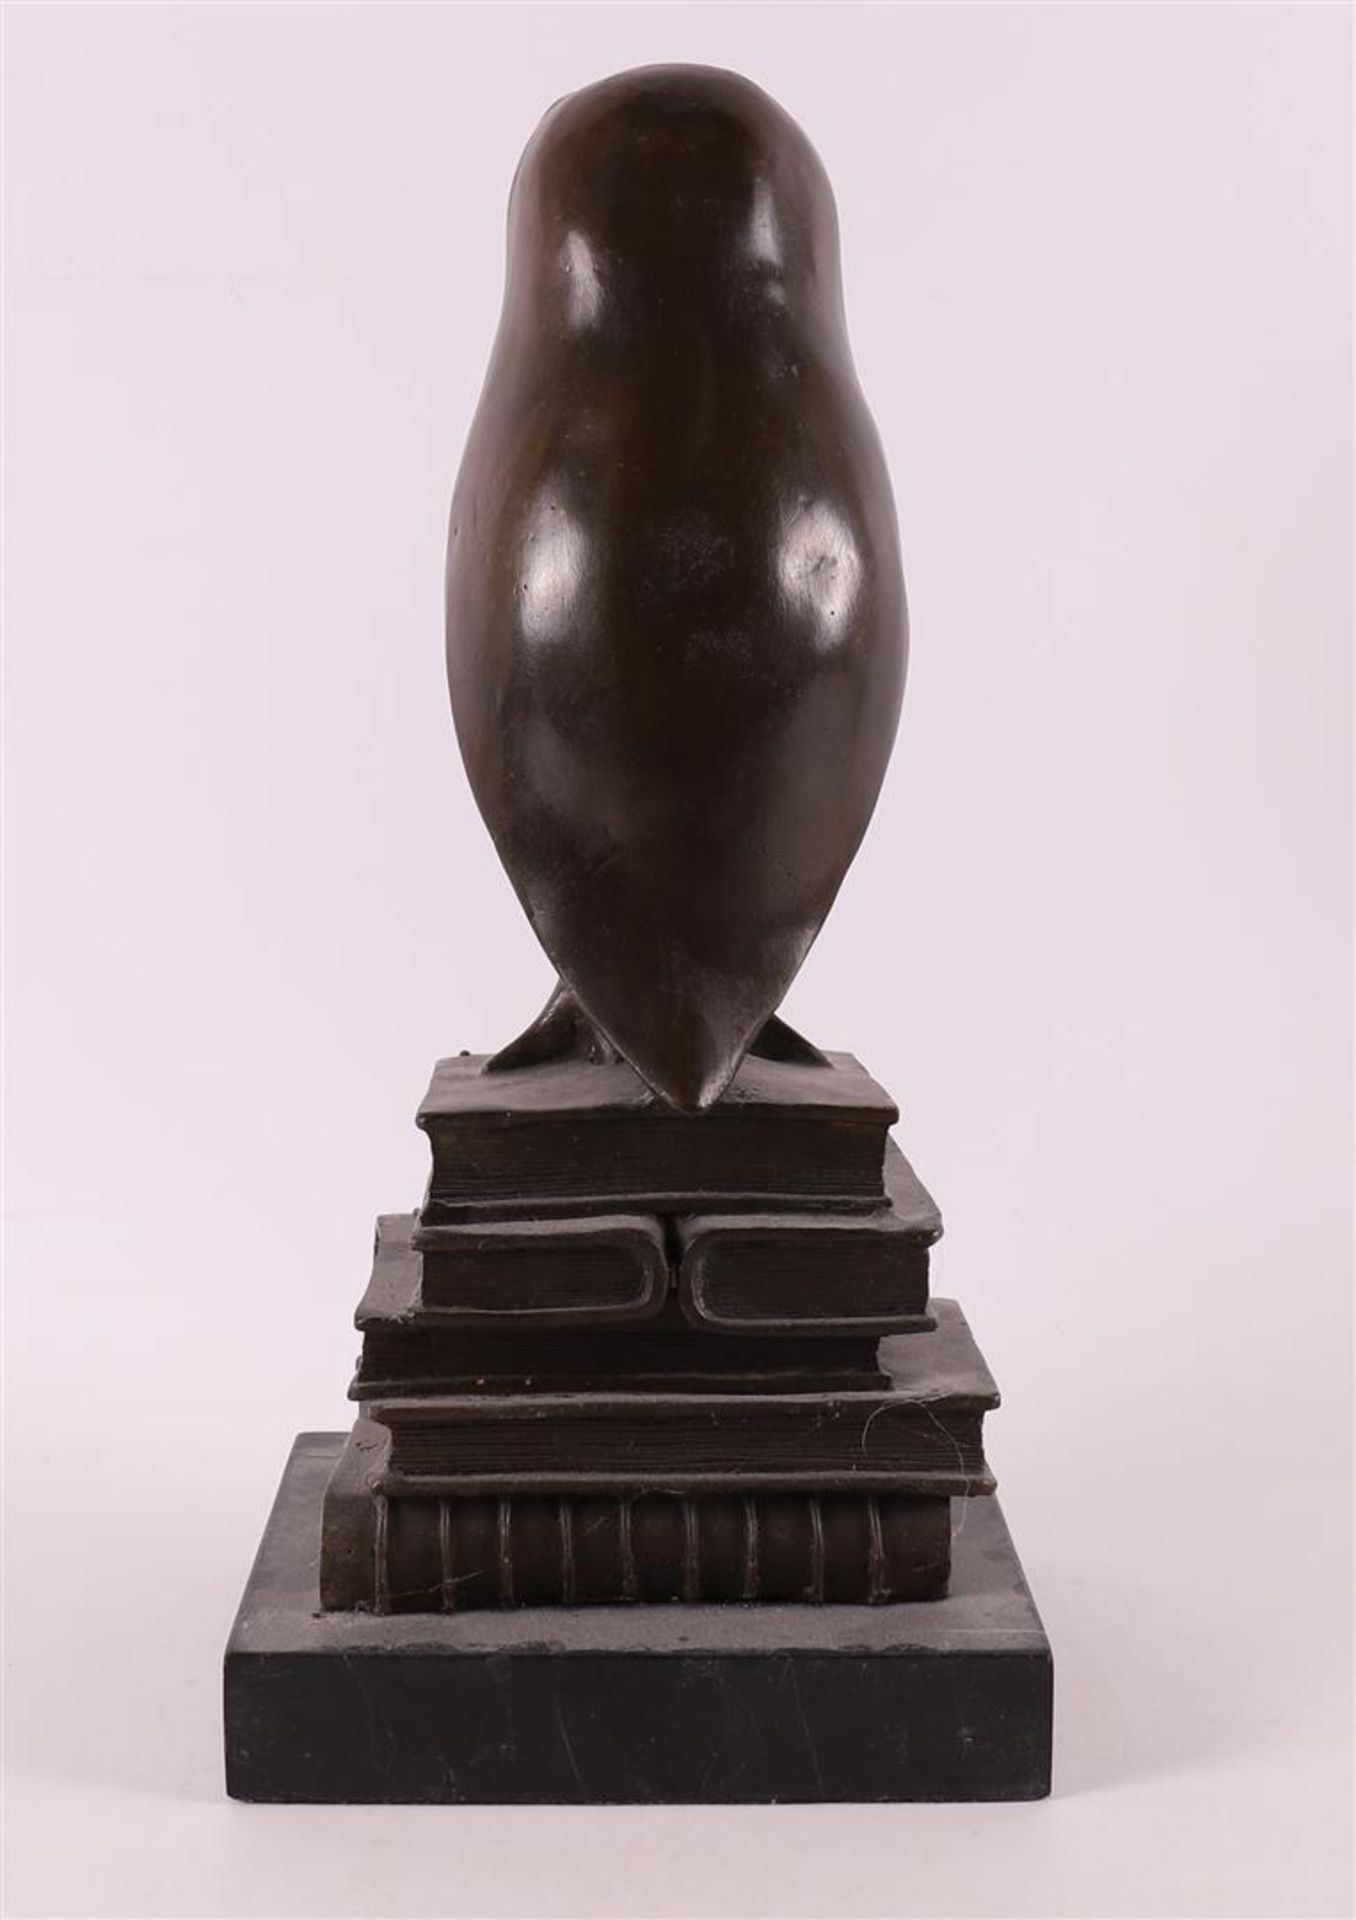 A brown patinated bronze owl sitting on books, Art Deco style. - Image 2 of 5